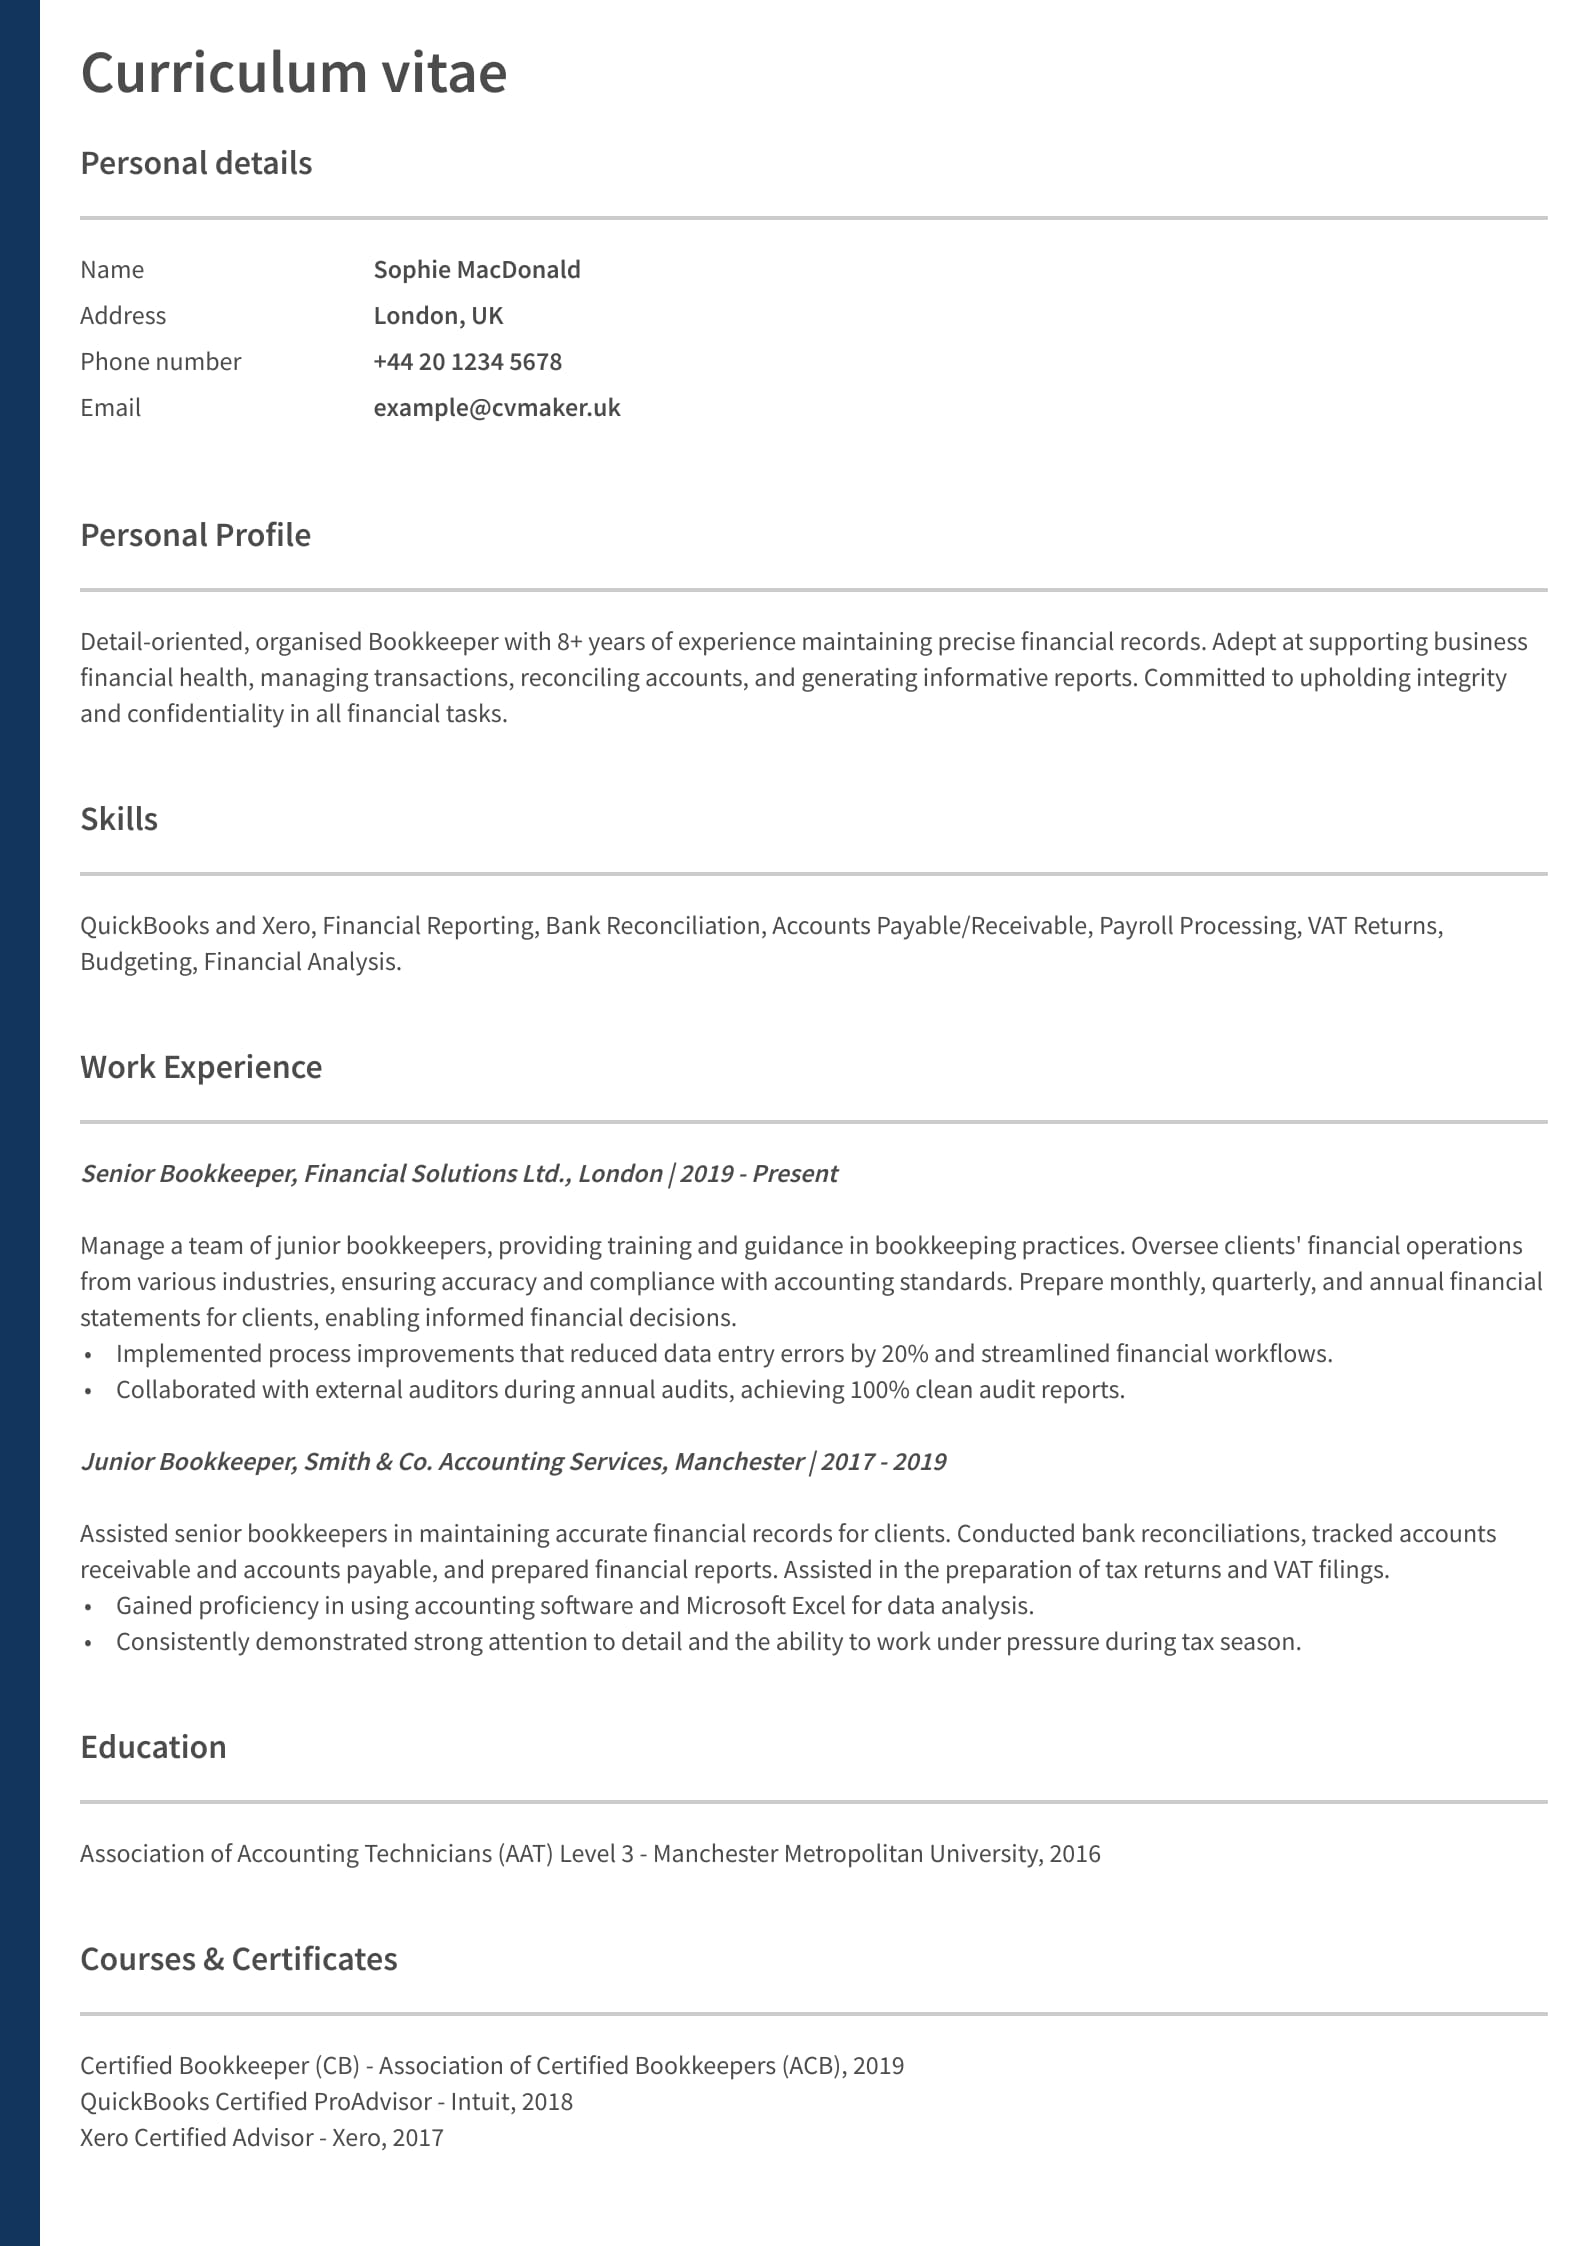 Bookkeeper CV example